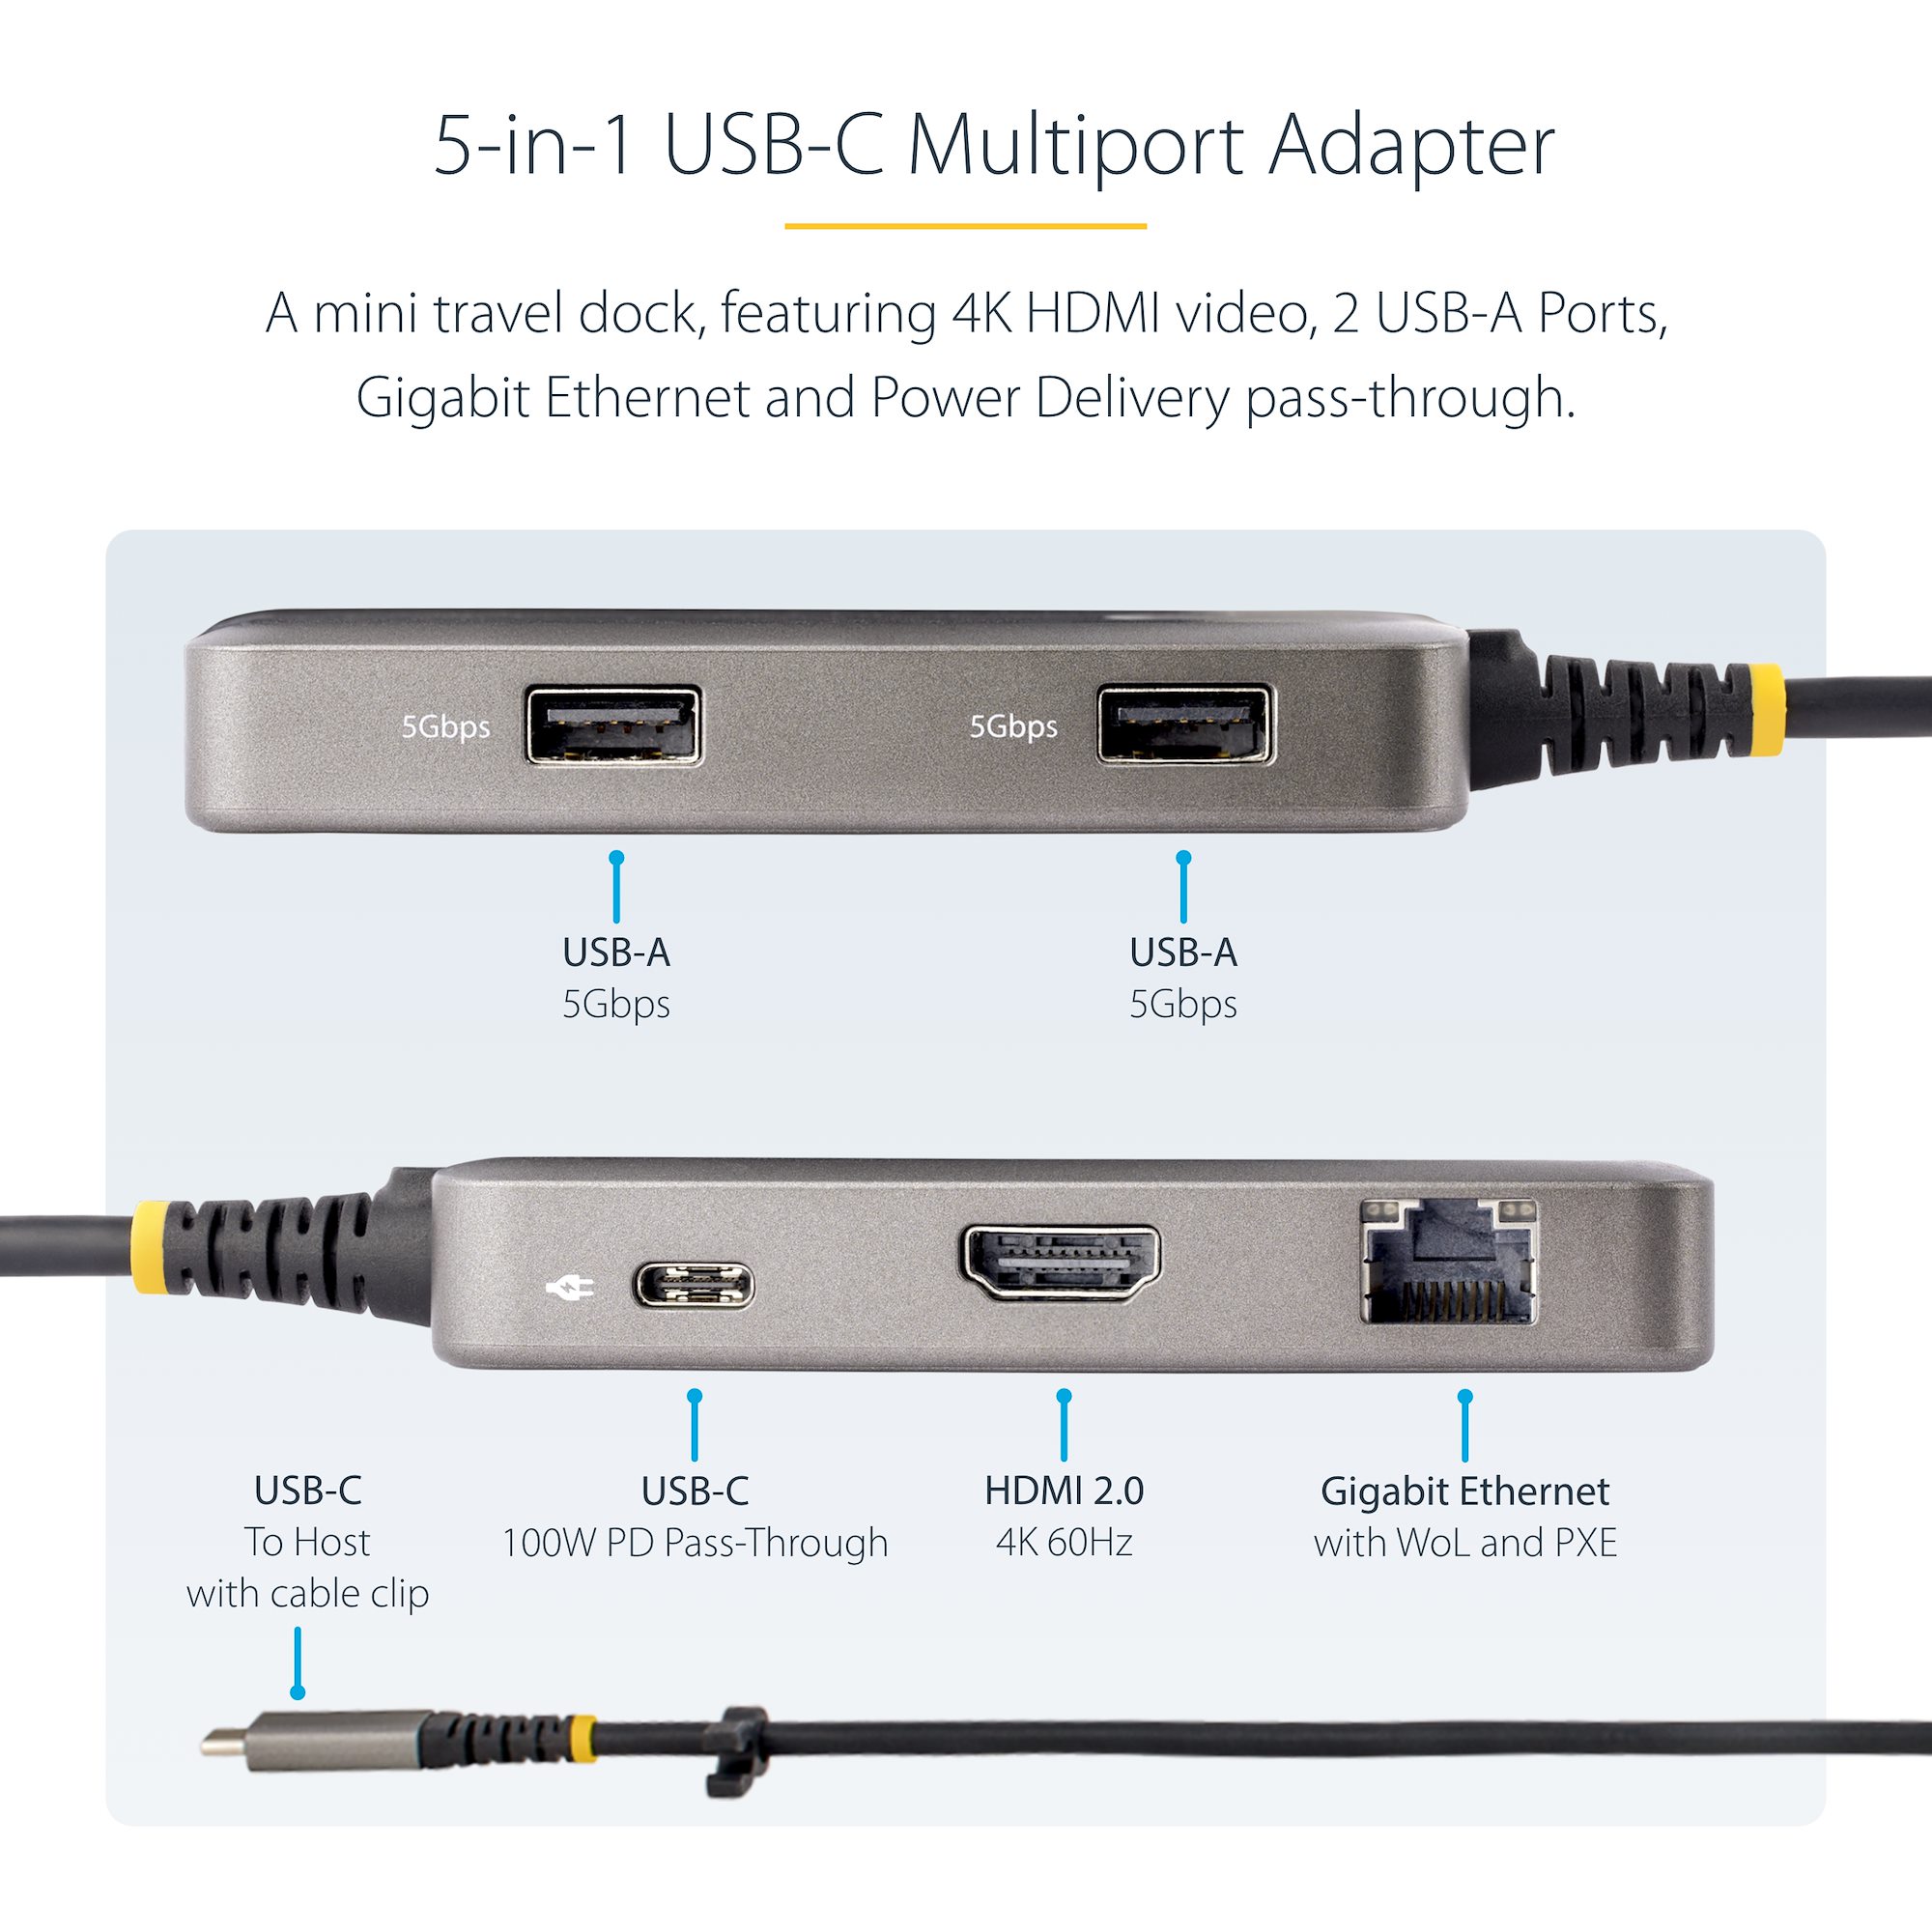 USB C Multiport Adapter, Dual HDMI Video, 4K 60Hz, 2Pt 5Gbps USB-A Hub,  100W Power Delivery Pass-Through/GbE/SD/MicroSD, 12/30cm Cable, Travel  Dock